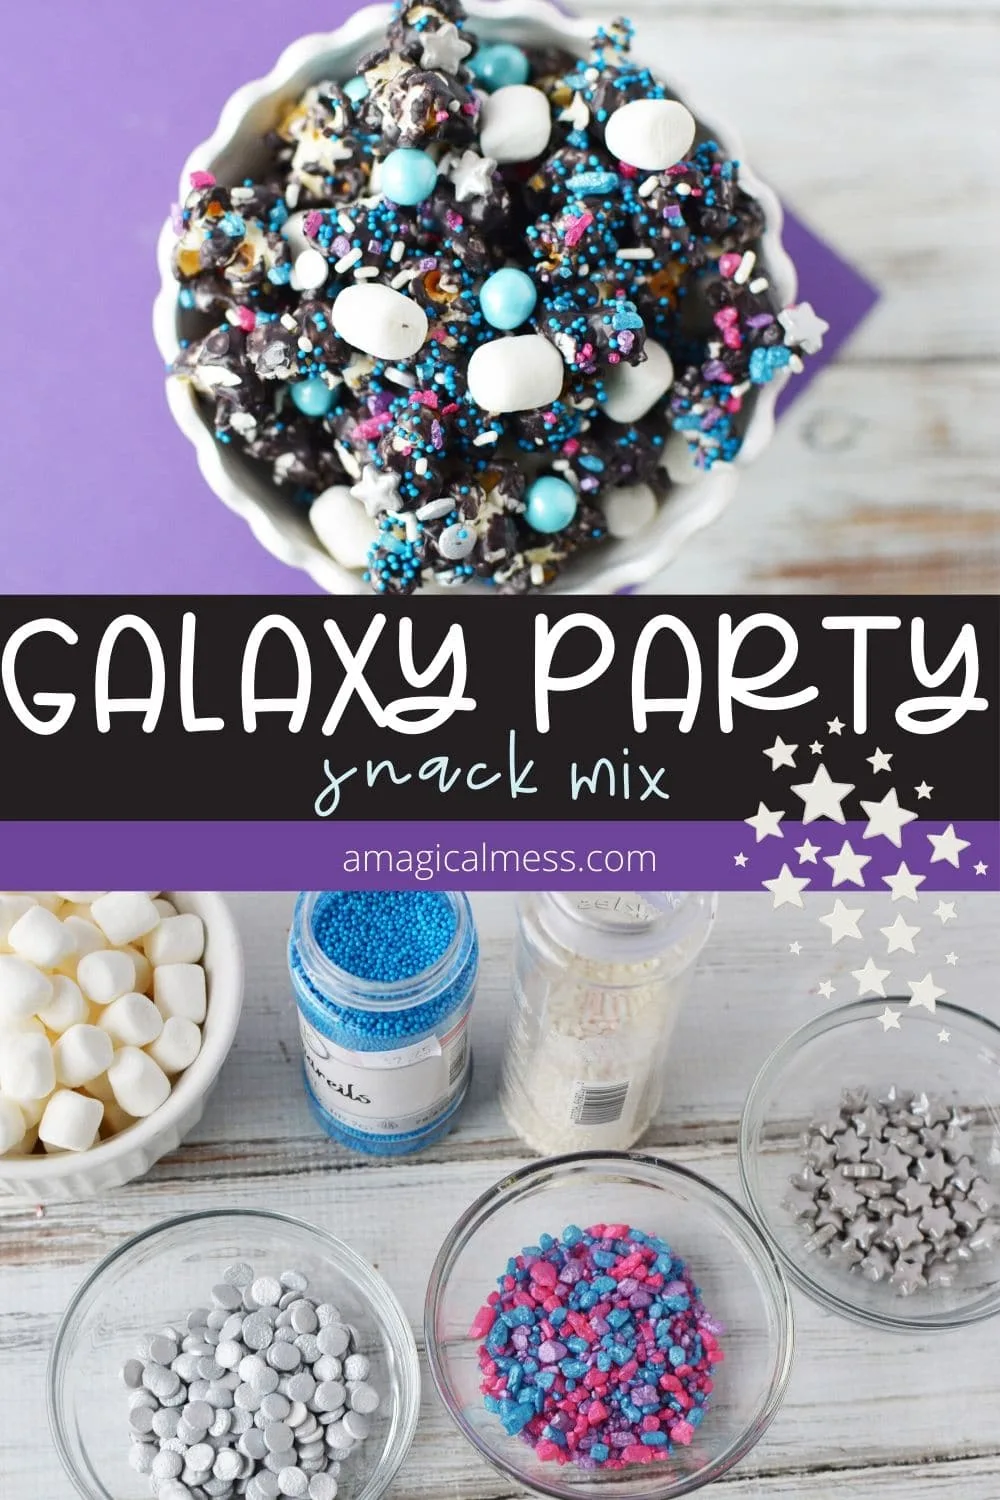 Snack mix and marshmallows for a galaxy party